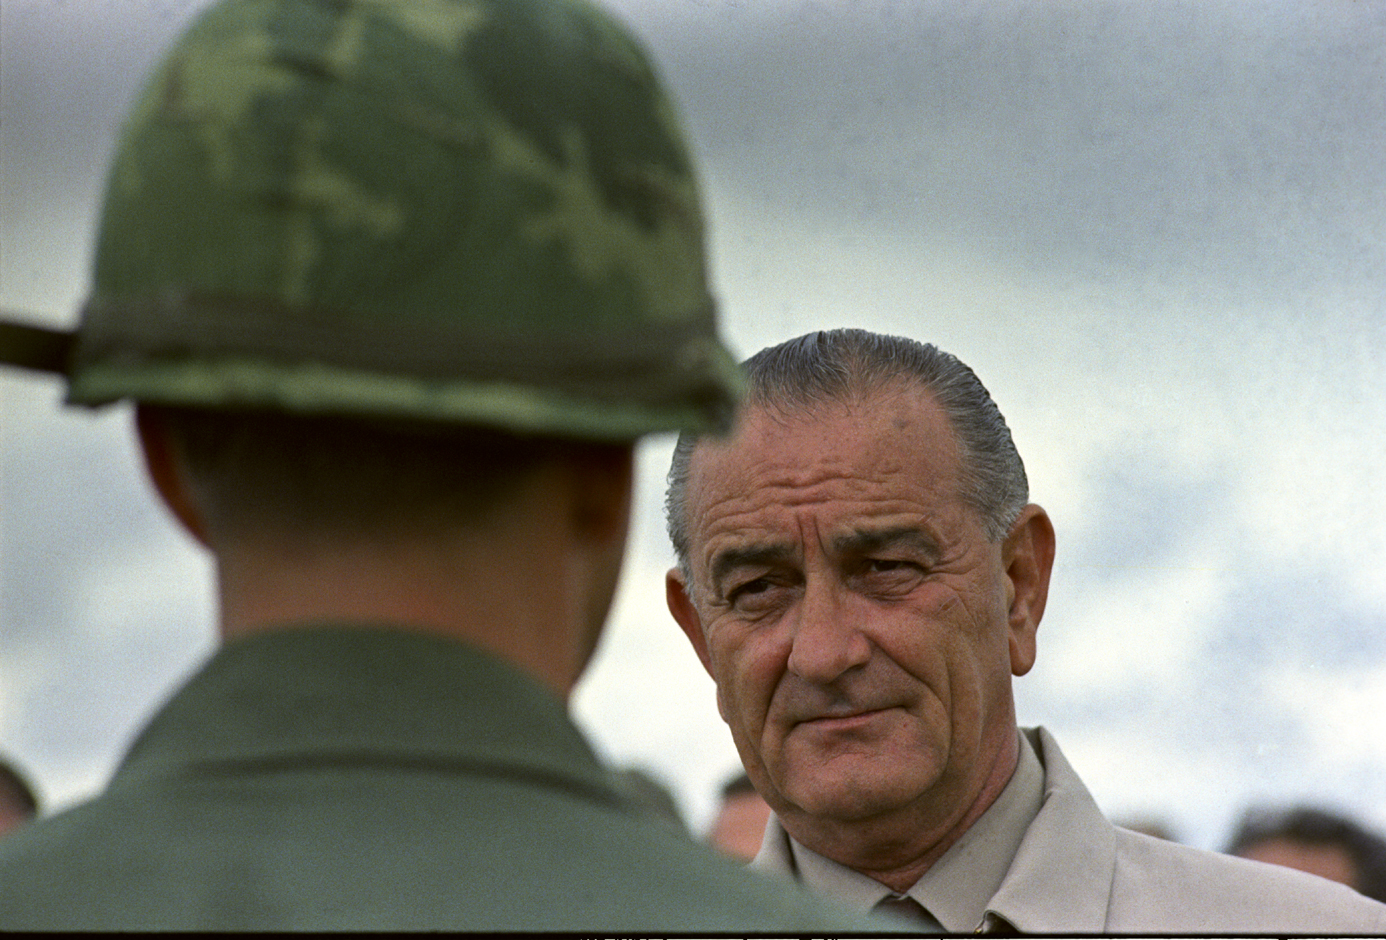 President Johnson engaging a soldier.